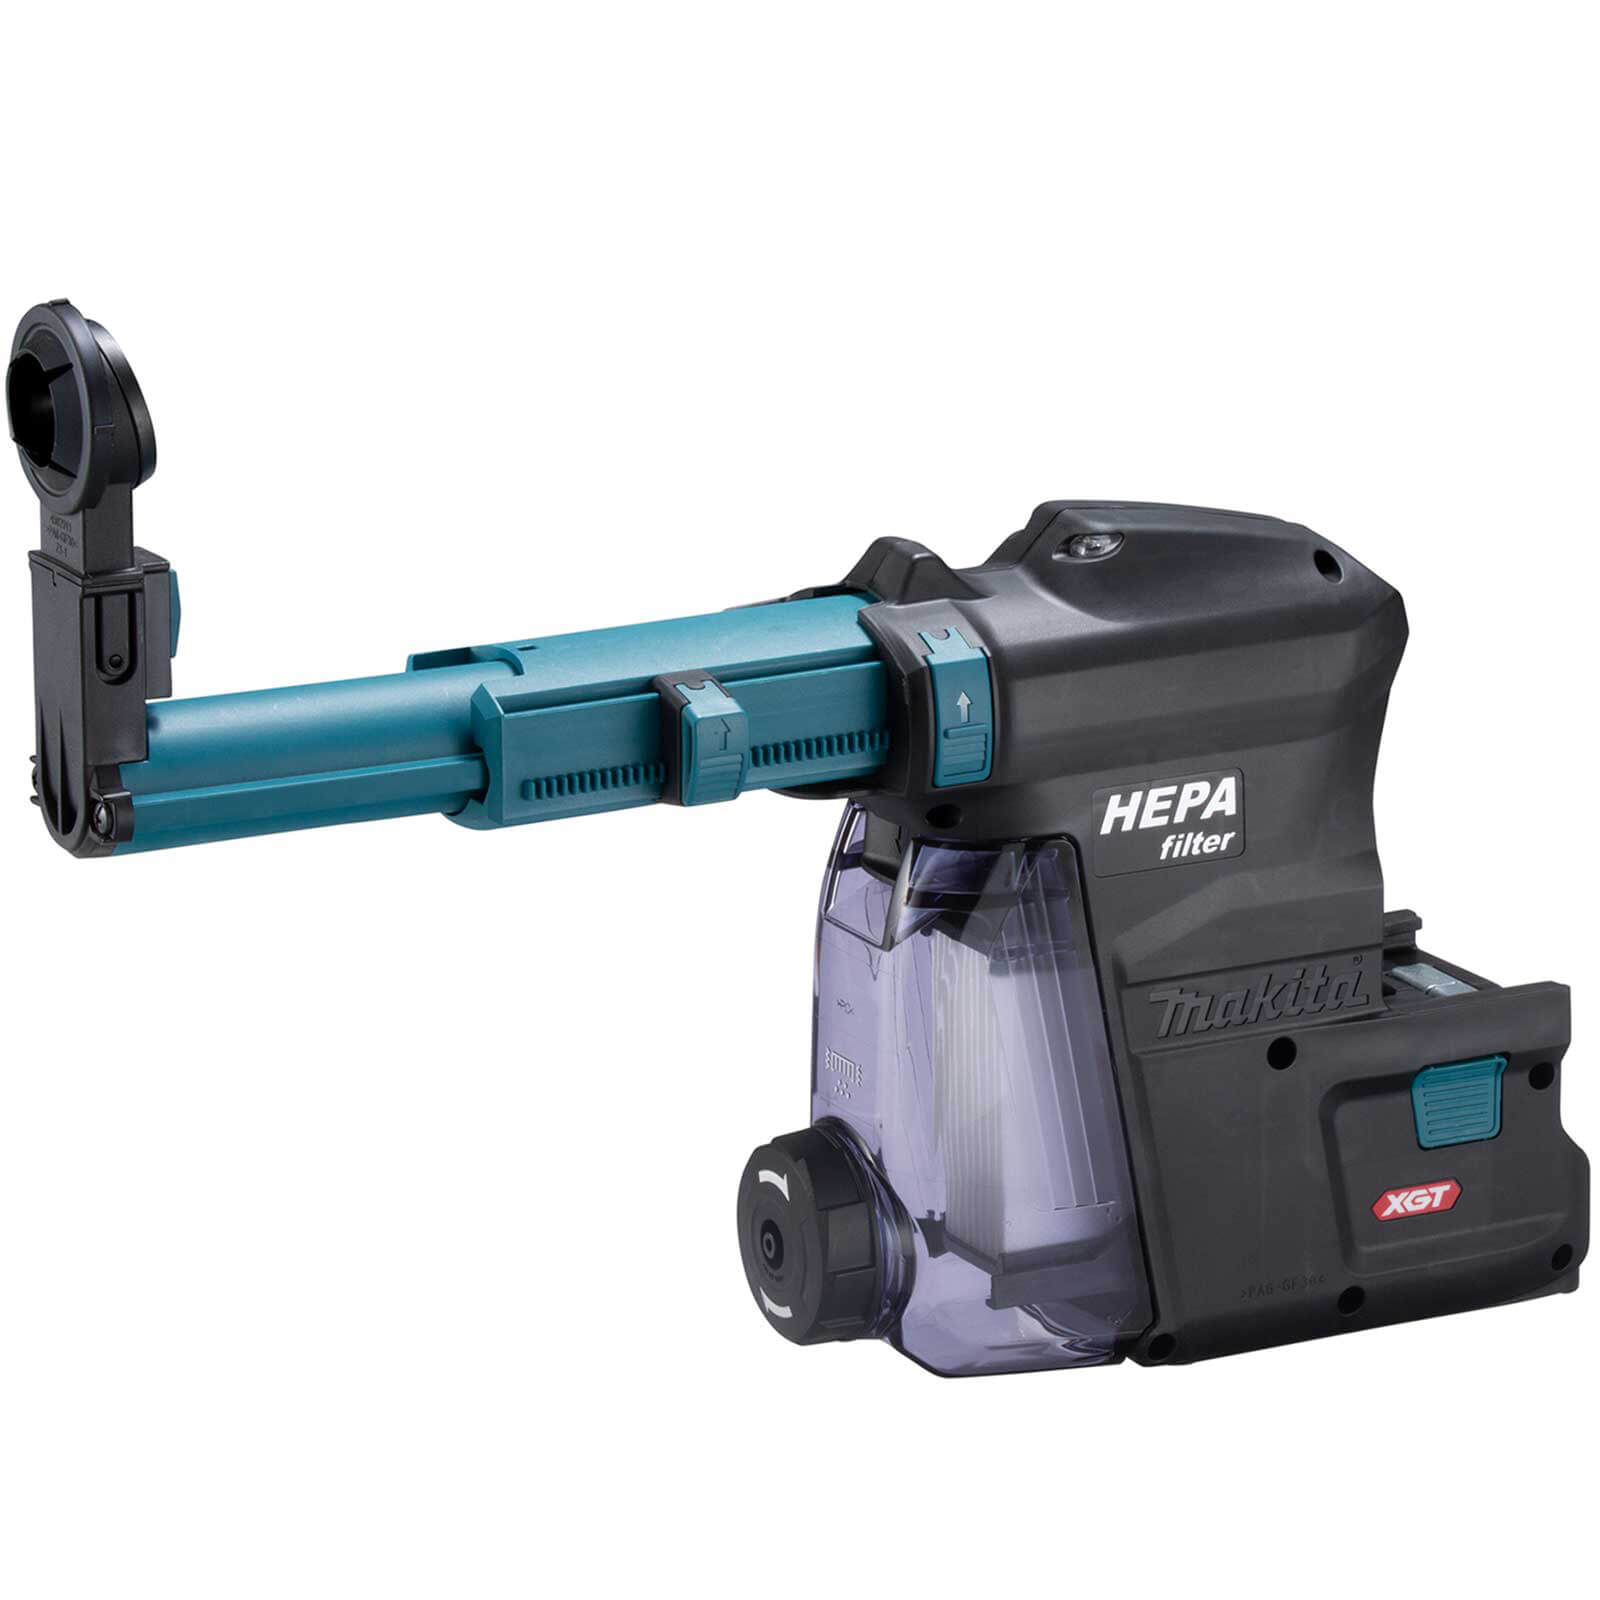 Image of Makita DX12 XGT Dust Extraction Attachment